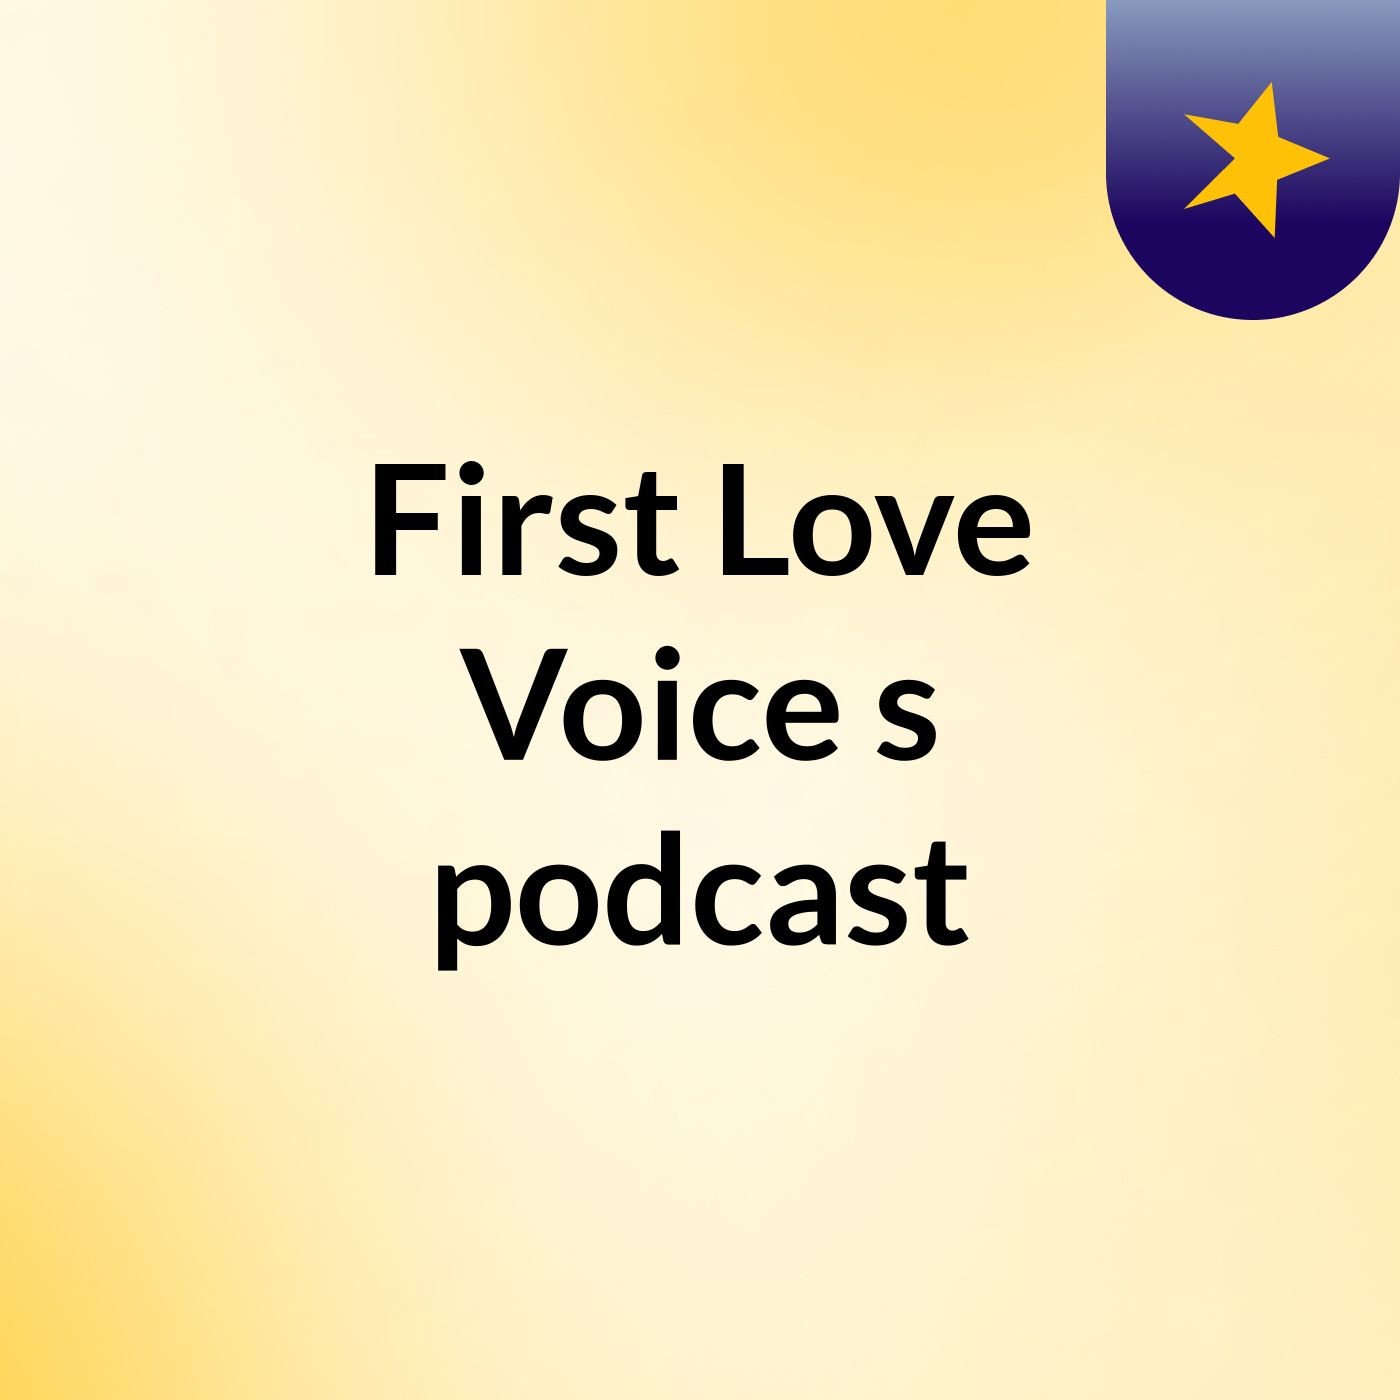 Episode 3 - First Love Voice's podcast